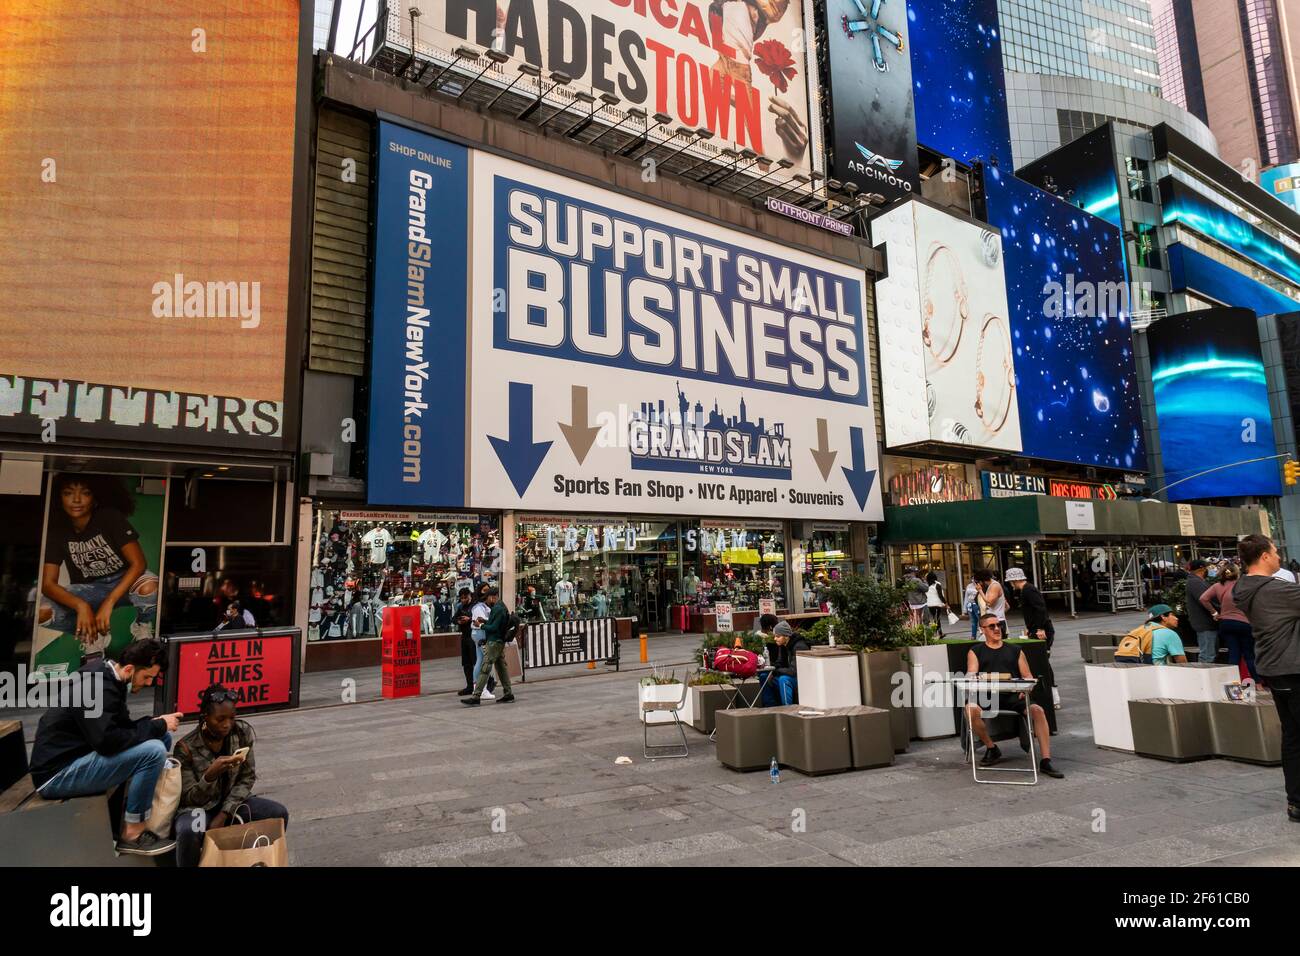 New York, USA. 27th Mar, 2021. The Grand Slam tourist oriented store in Times Square in New York advertises that it is a small business in need of support on Saturday, March 27, 2021. (ÂPhoto by Richard B. Levine) Credit: Sipa USA/Alamy Live News Stock Photo